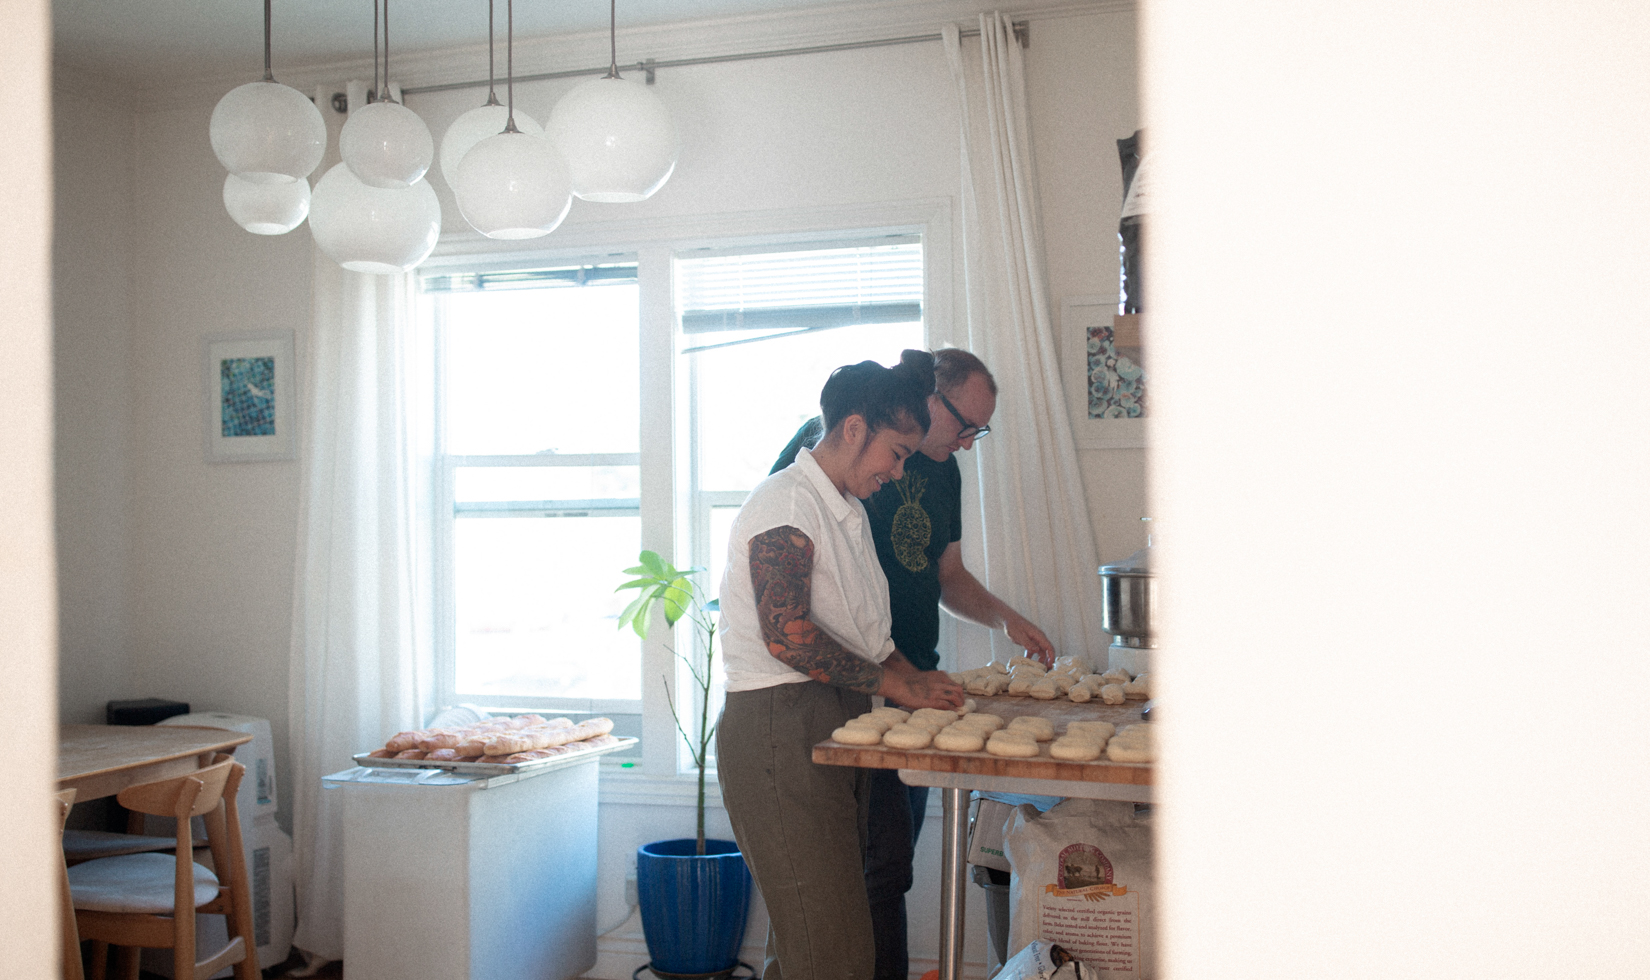 husband and wife bake bread in sunny kitchen